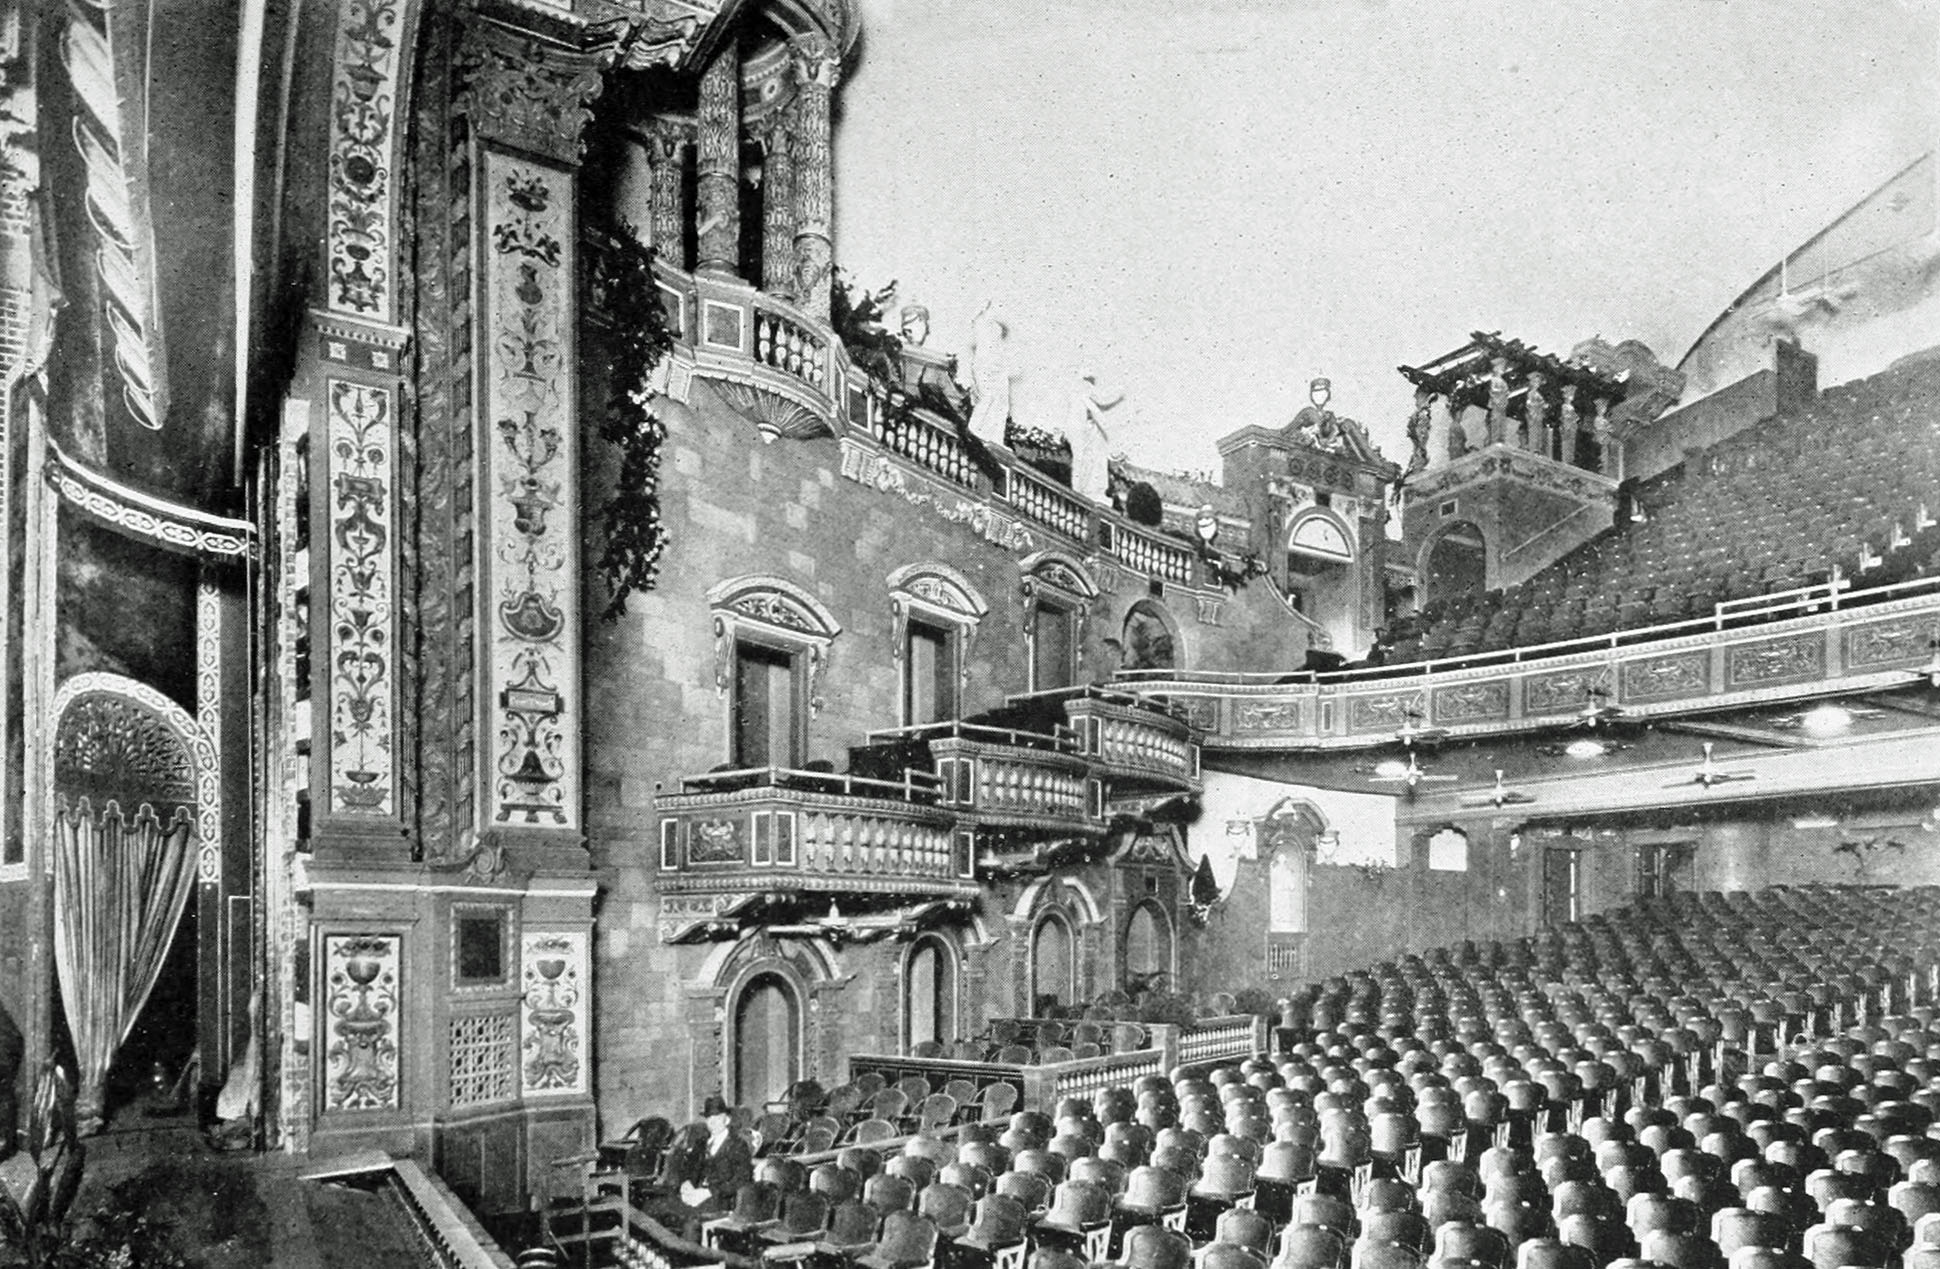 Auditorium of the Majestic Theatre, Houston, Texas, showing flower-laden garden side wall.